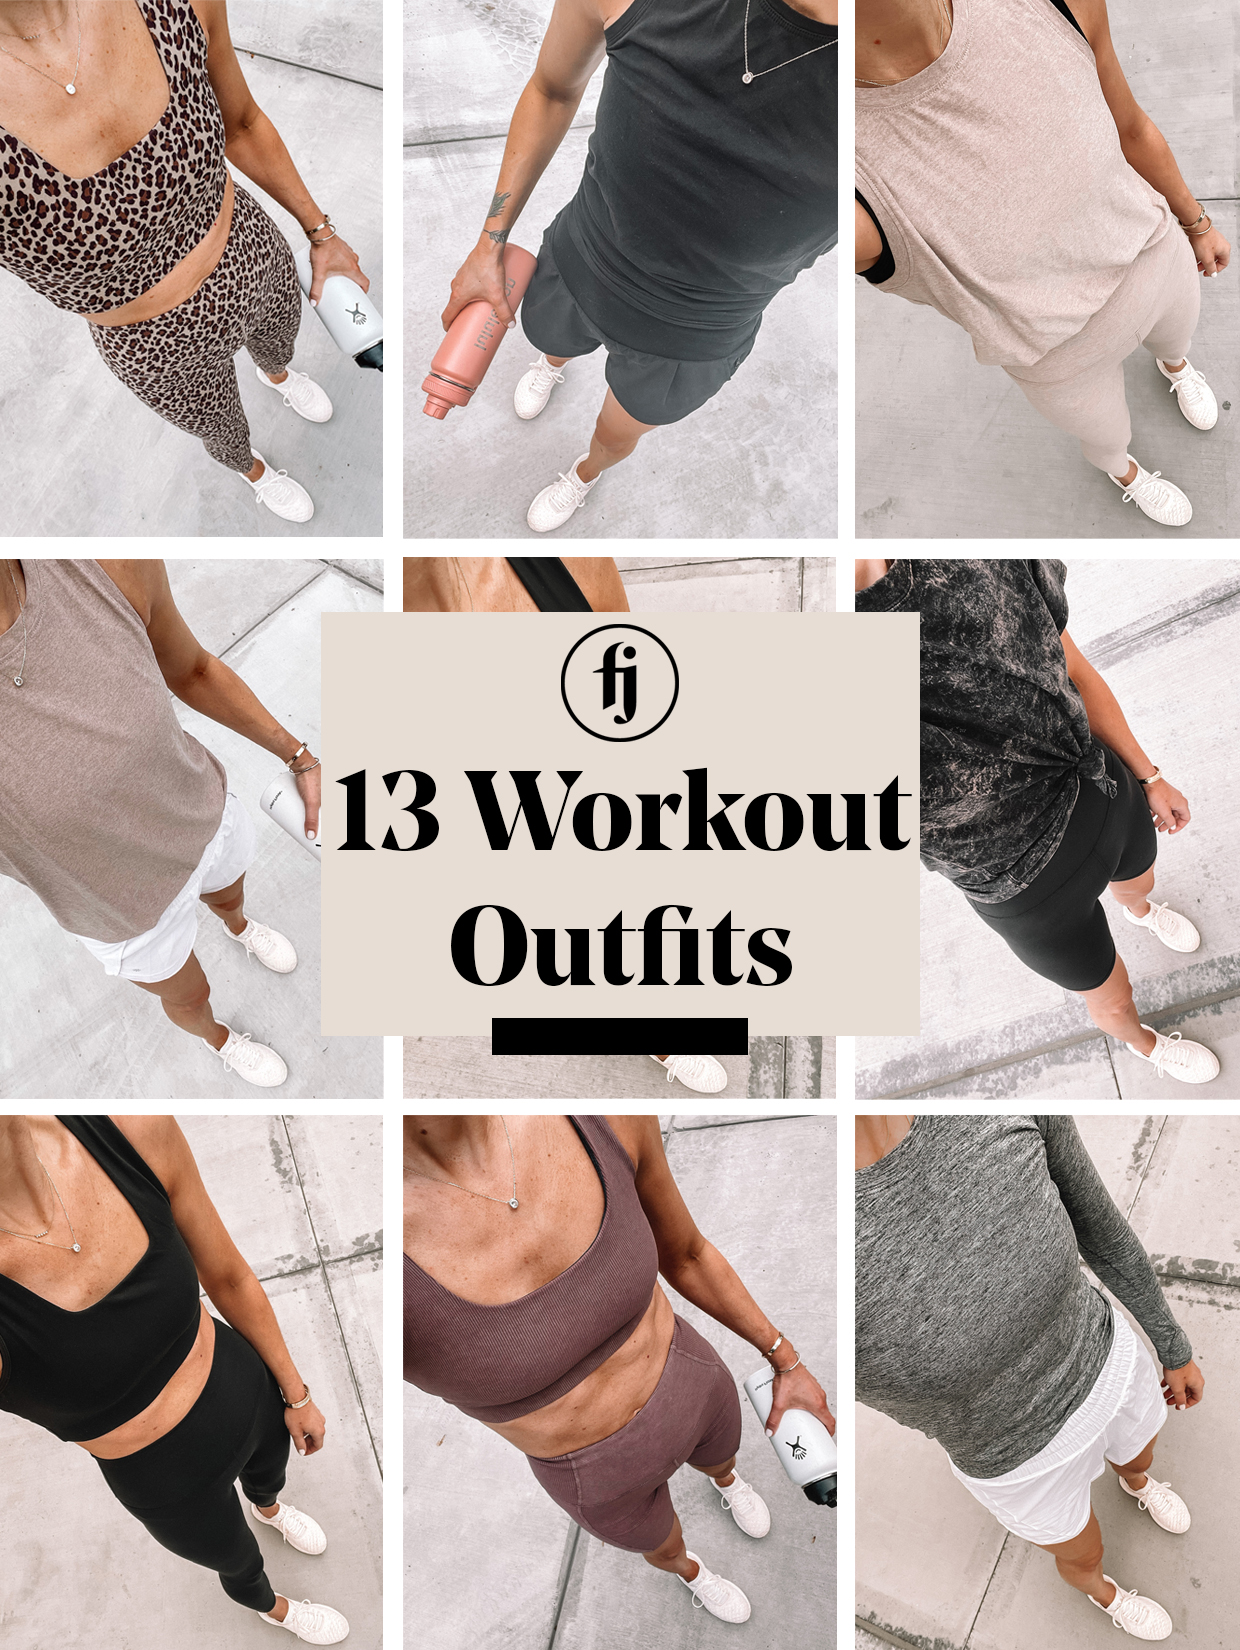 Three Workout Outfits  Womens workout outfits, Gymwear outfits, Cute running  outfit